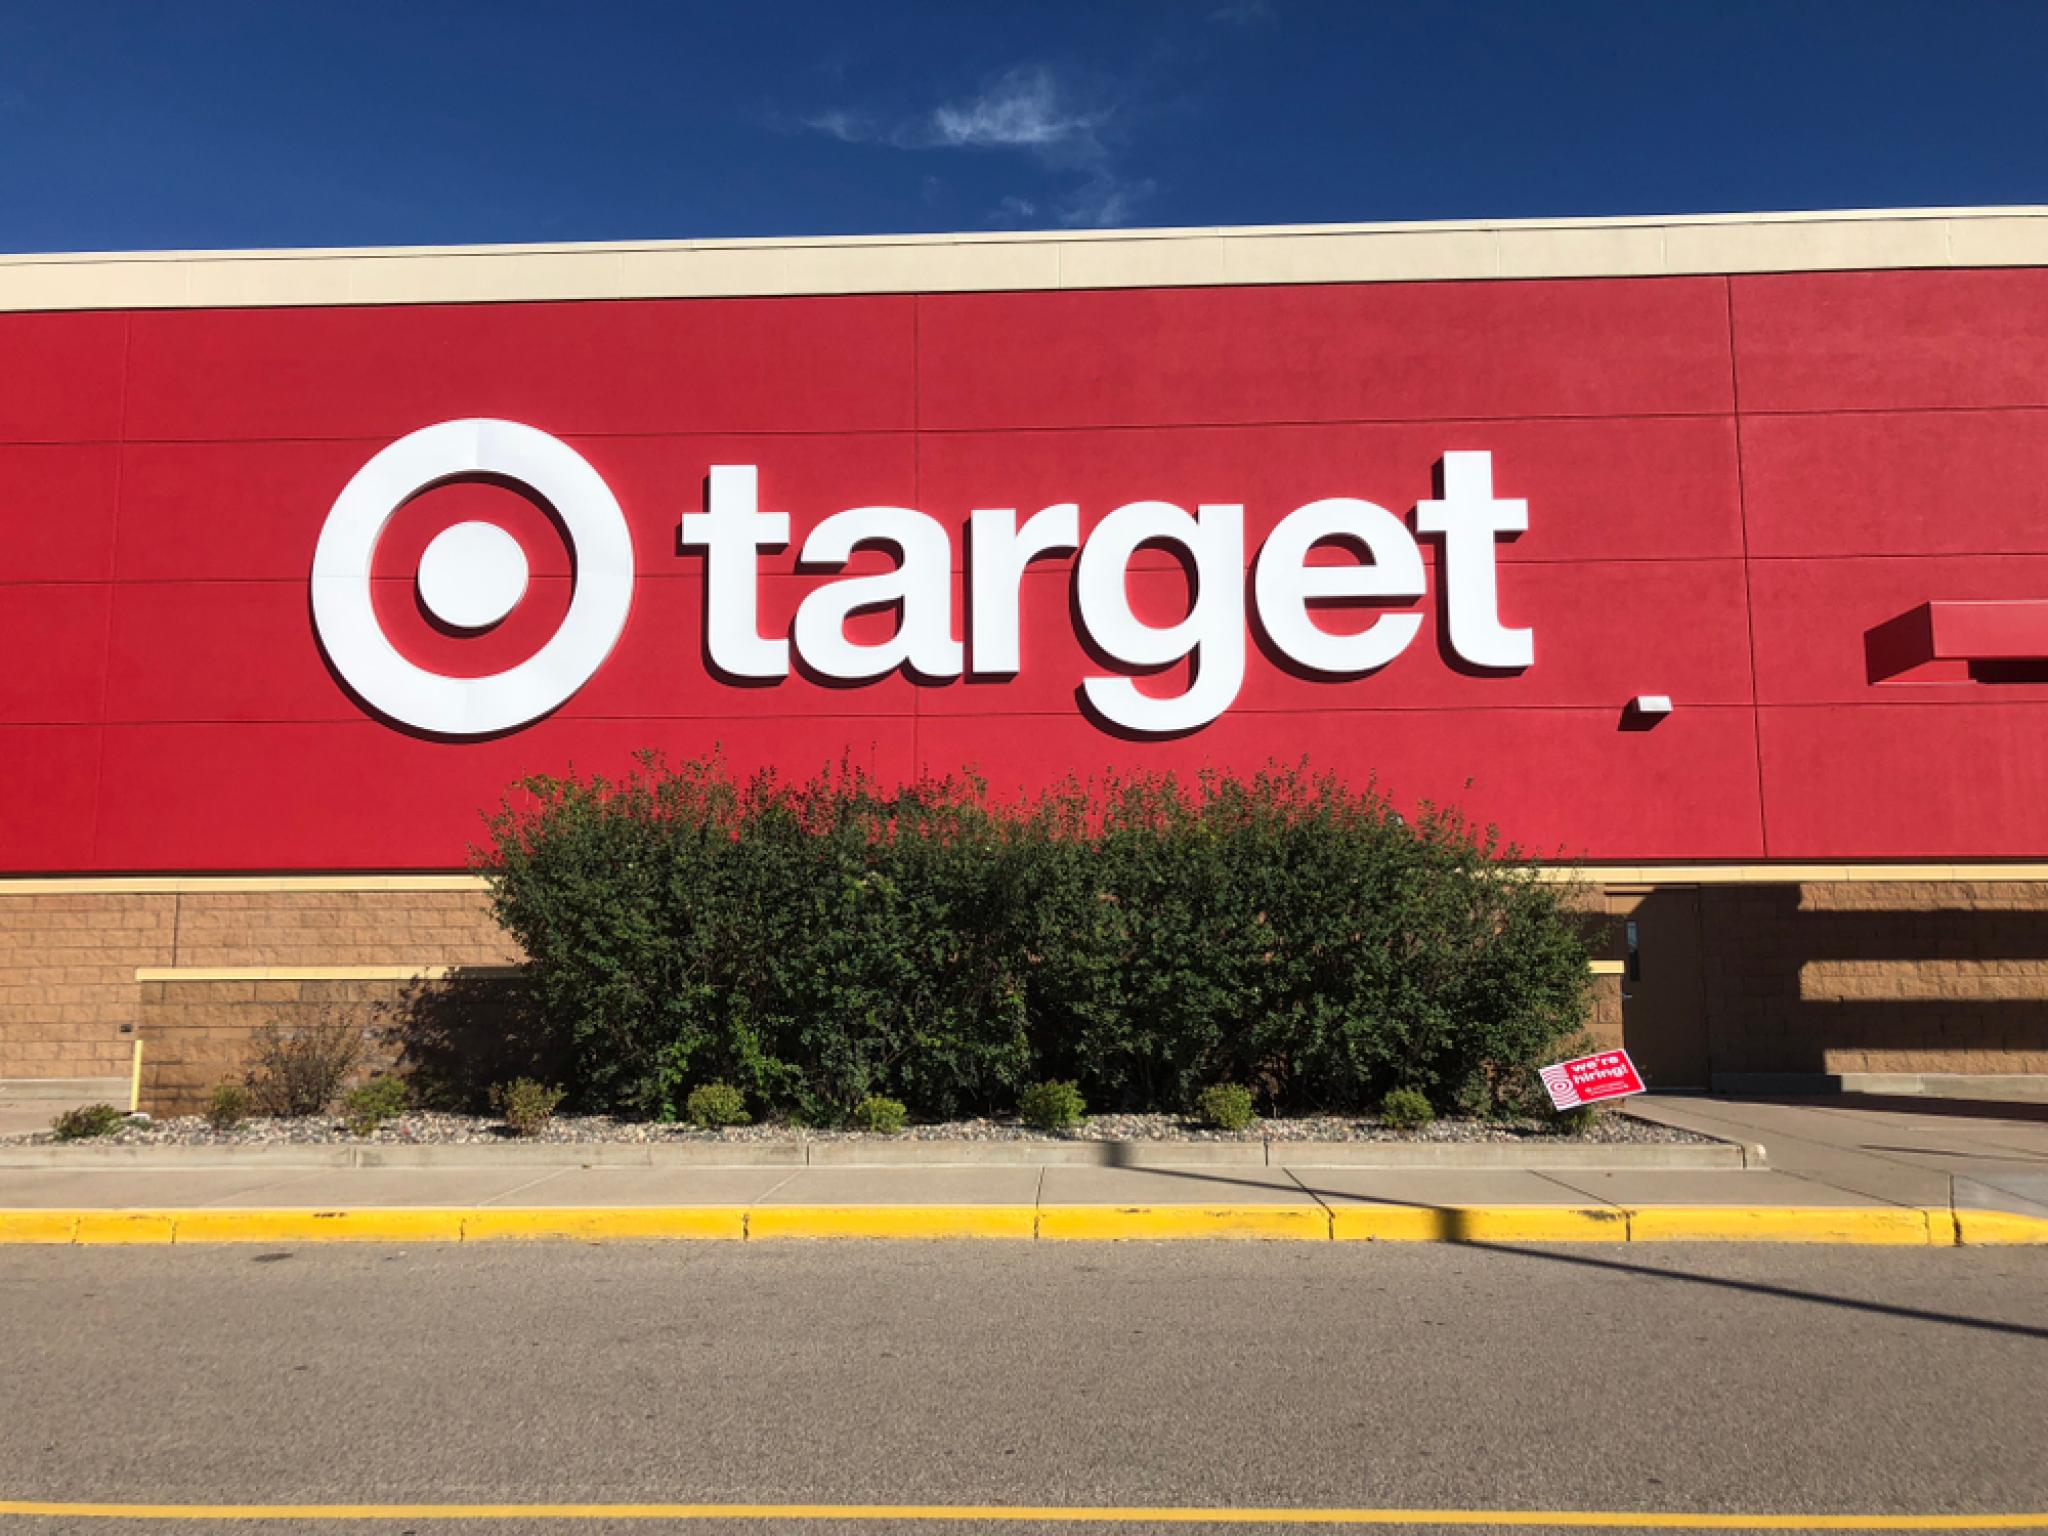  target-sweetens-the-deal-salaried-employees-reportedly-to-see-bonus-bonanza 